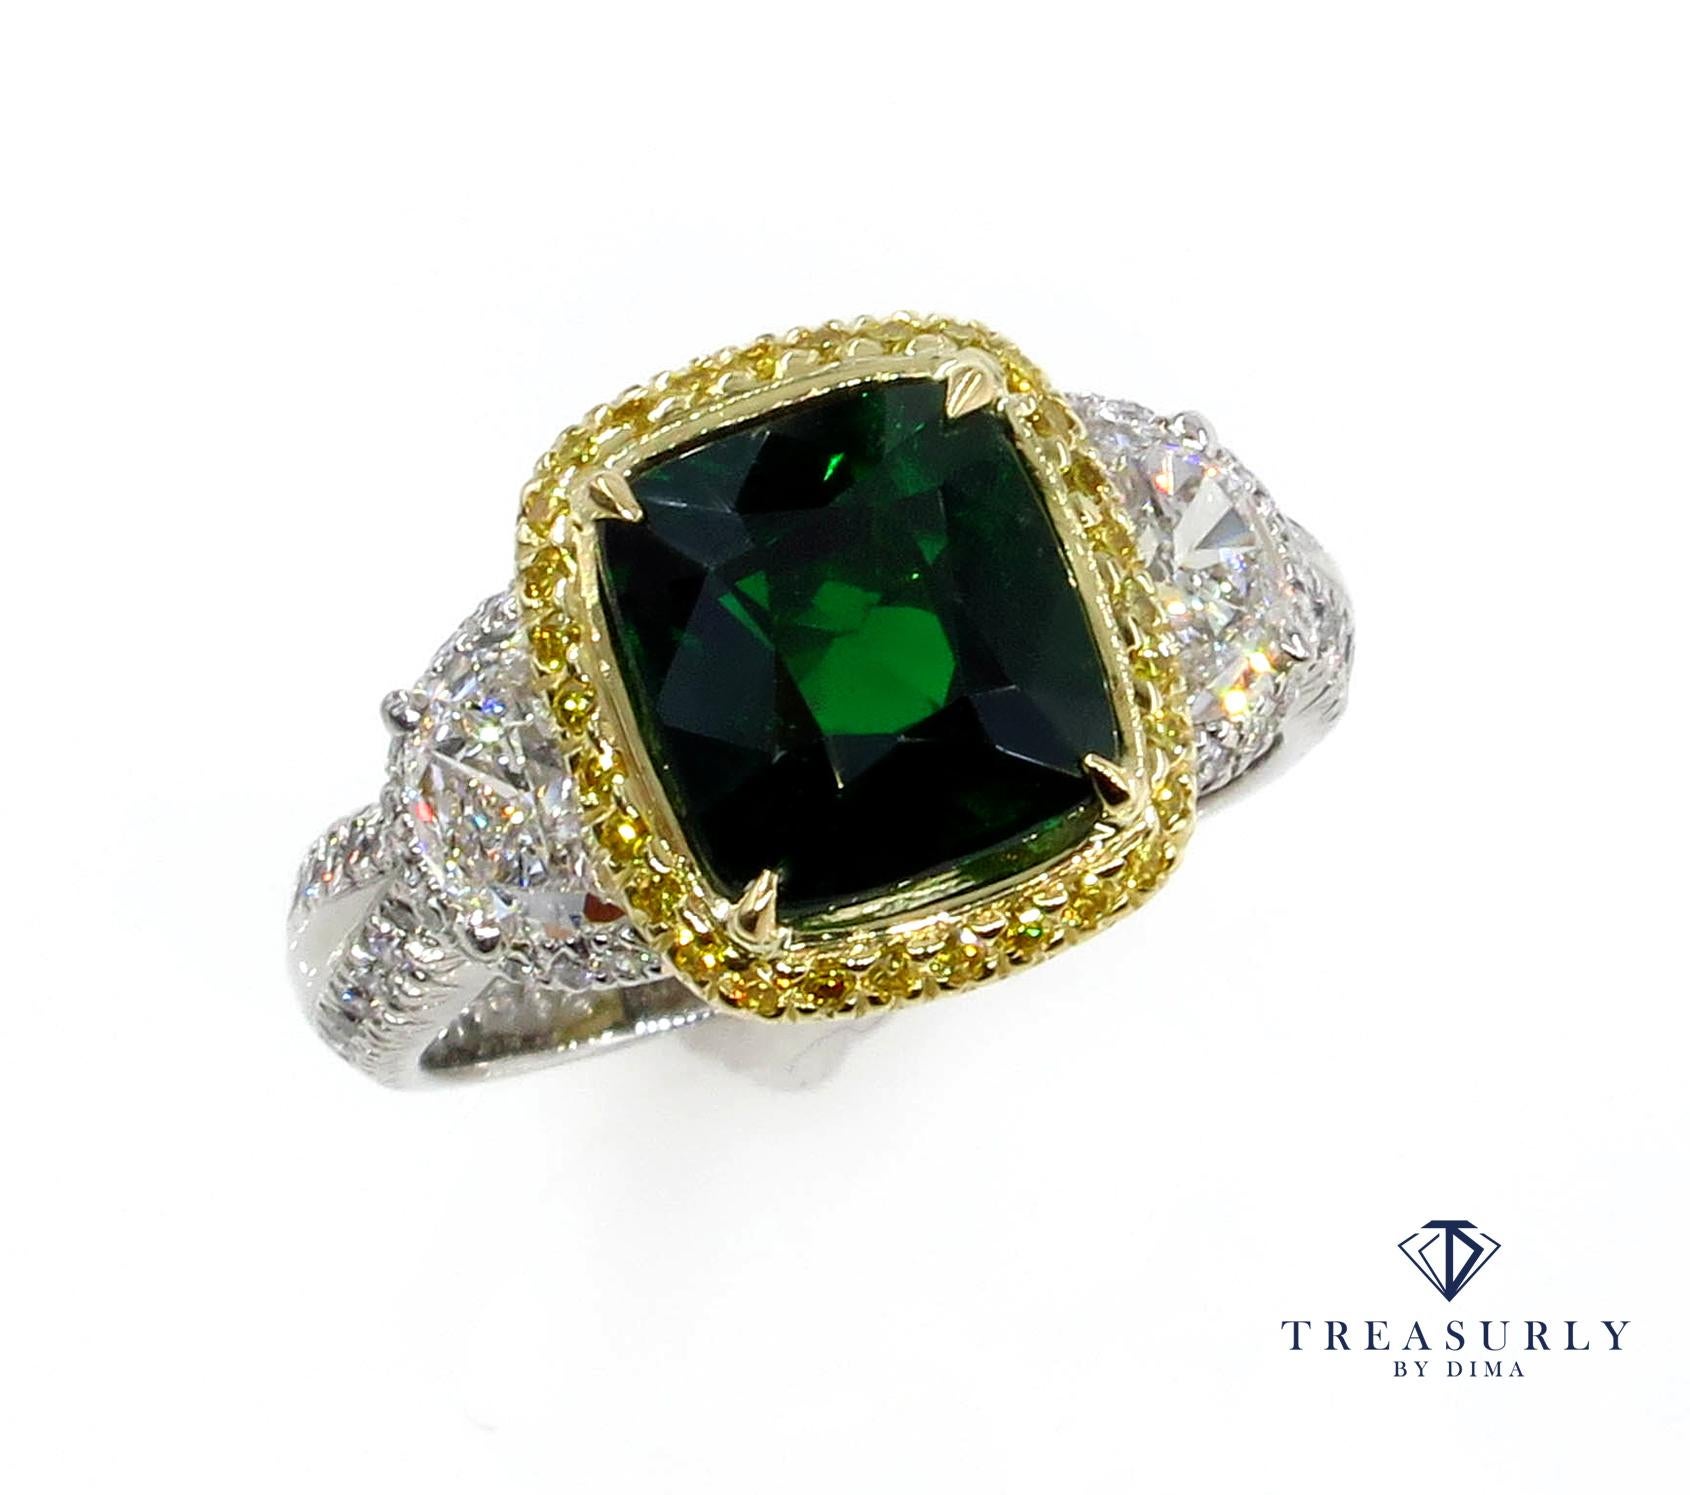 Tsavorite has all of the qualities you want in a gemstone: beauty, rarity, intrinsic value, and romance. With its natural, fresh green color and scintillating brilliance, Tsavorite is one of the most beautiful green gemstones in the world. Tsavorite